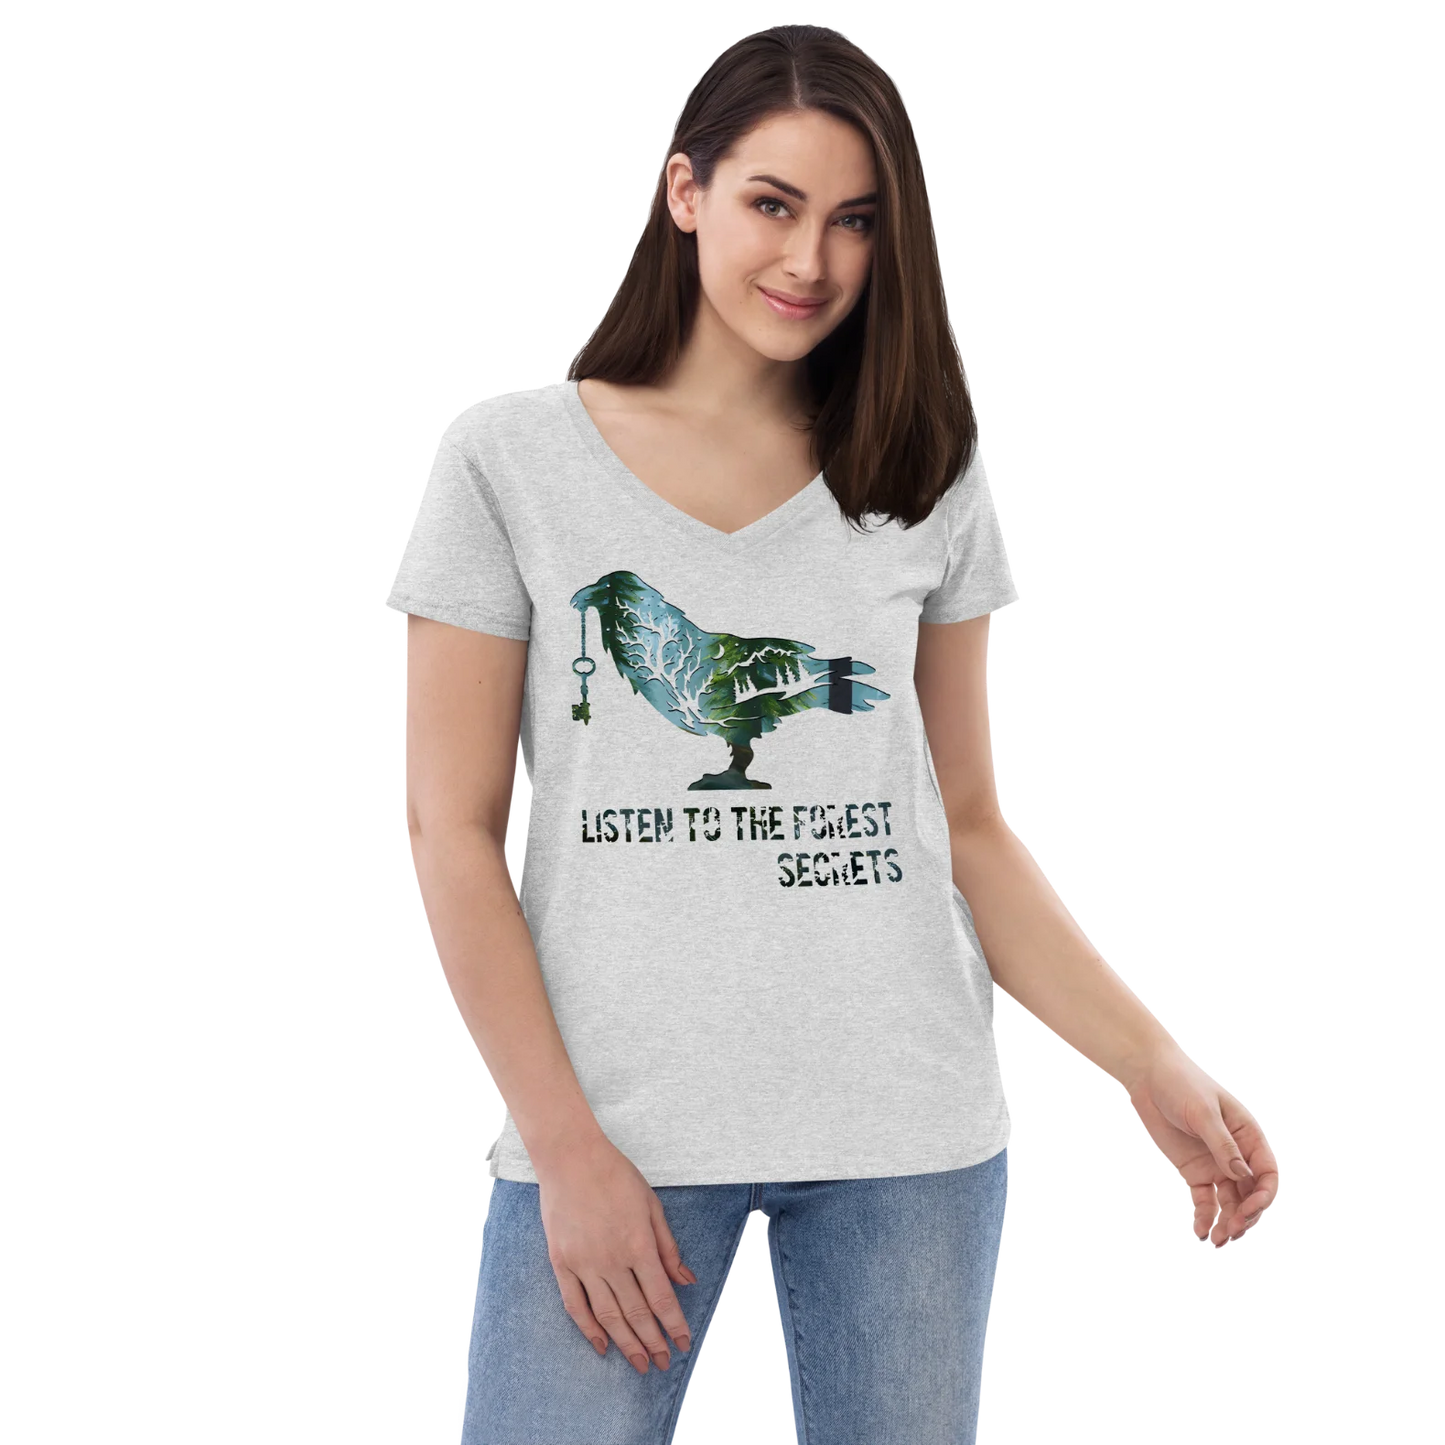 "Lost in Nature's Embrace" Recycled V-neck T-shirt